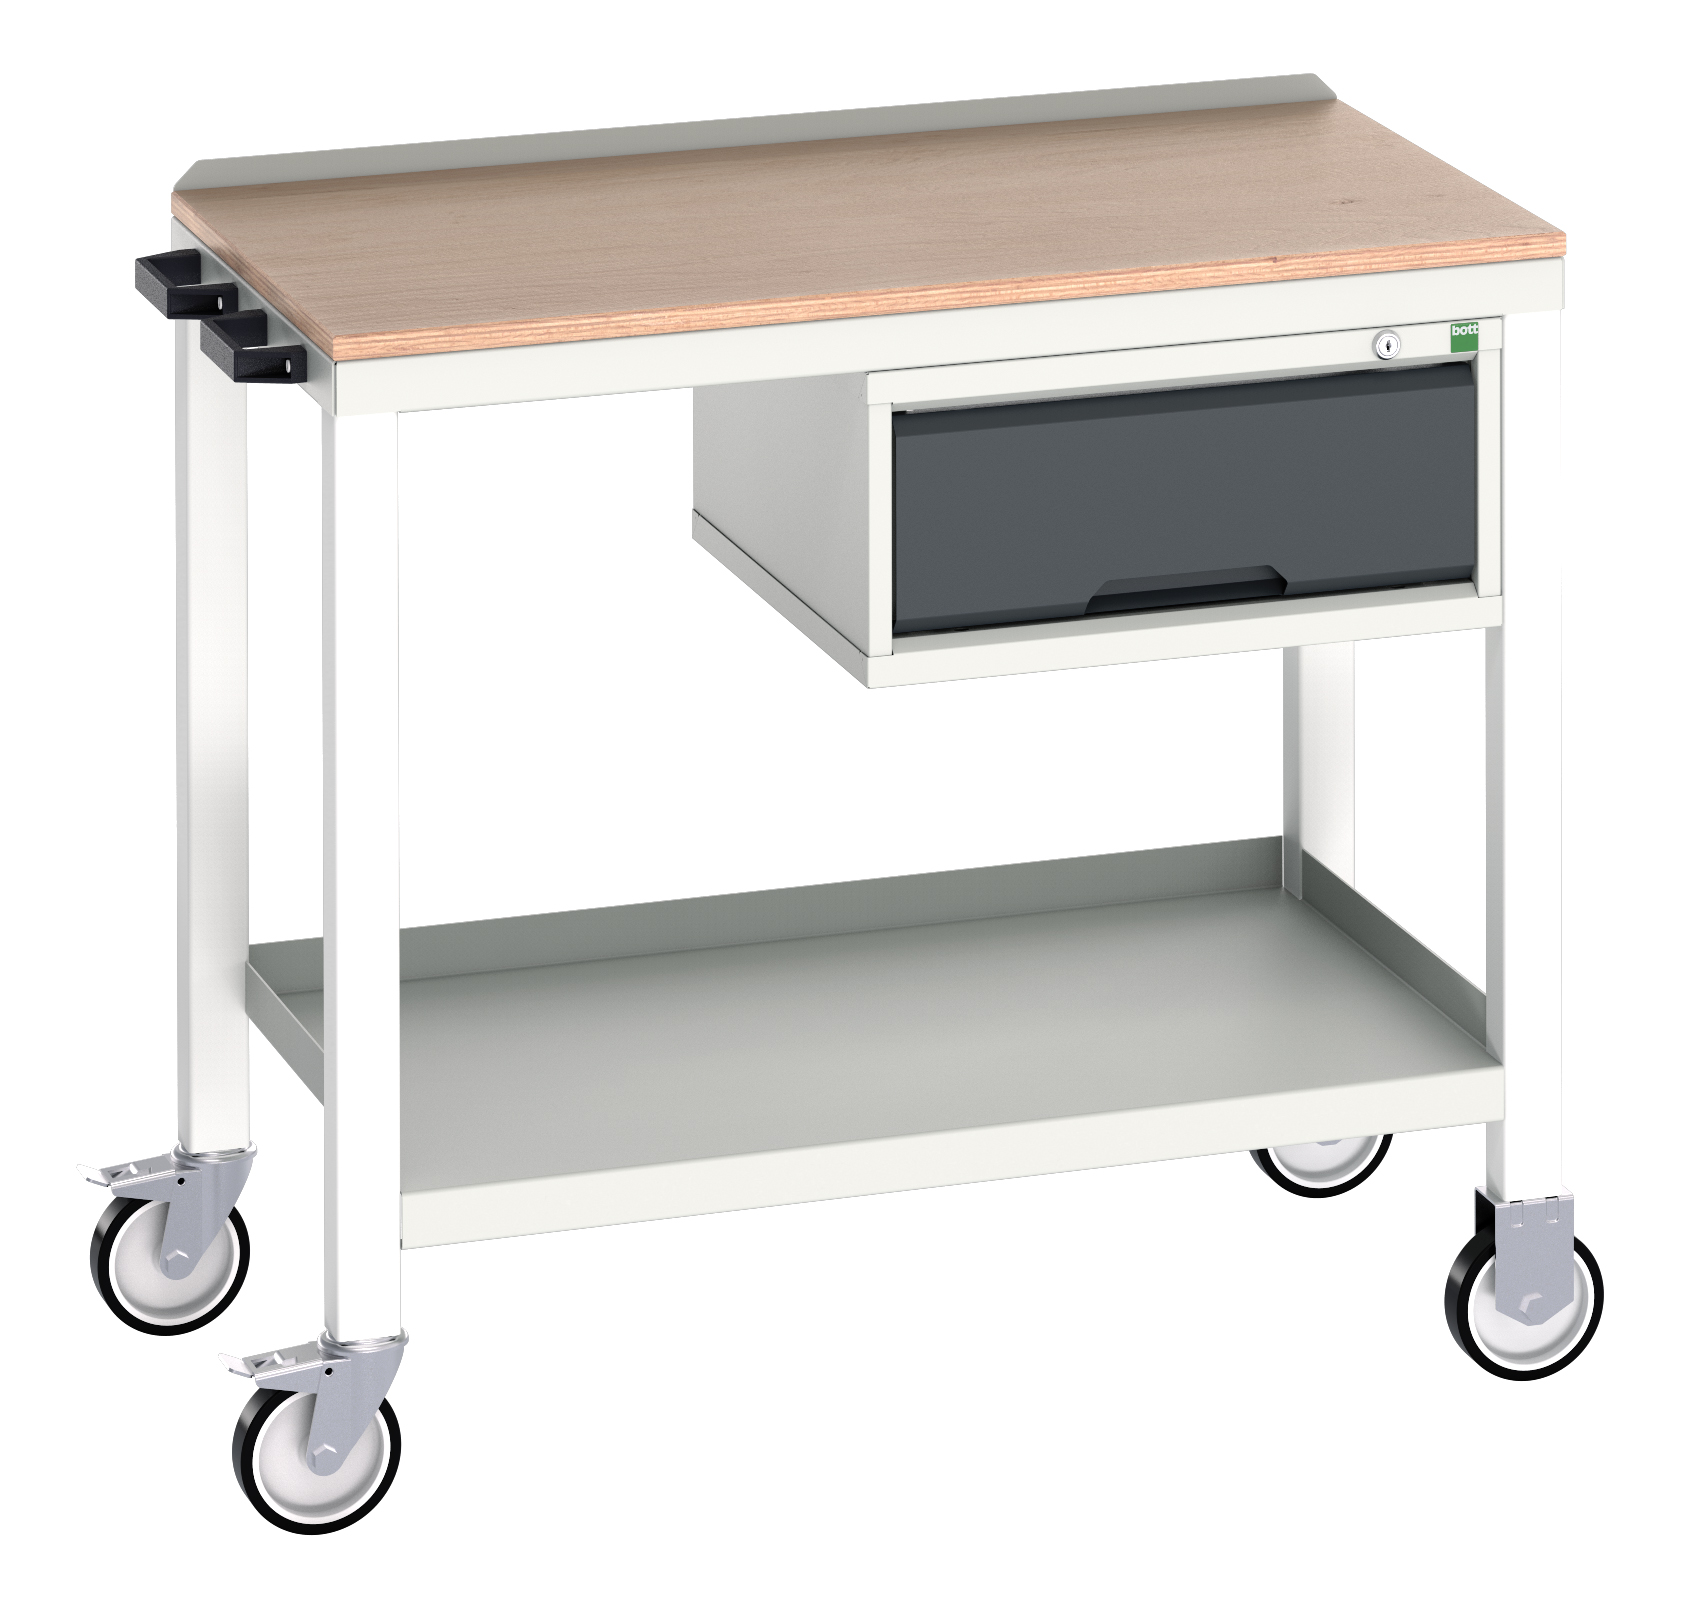 Bott Verso Mobile Welded Bench With 1 Drawer Cabinet - 16922801.19